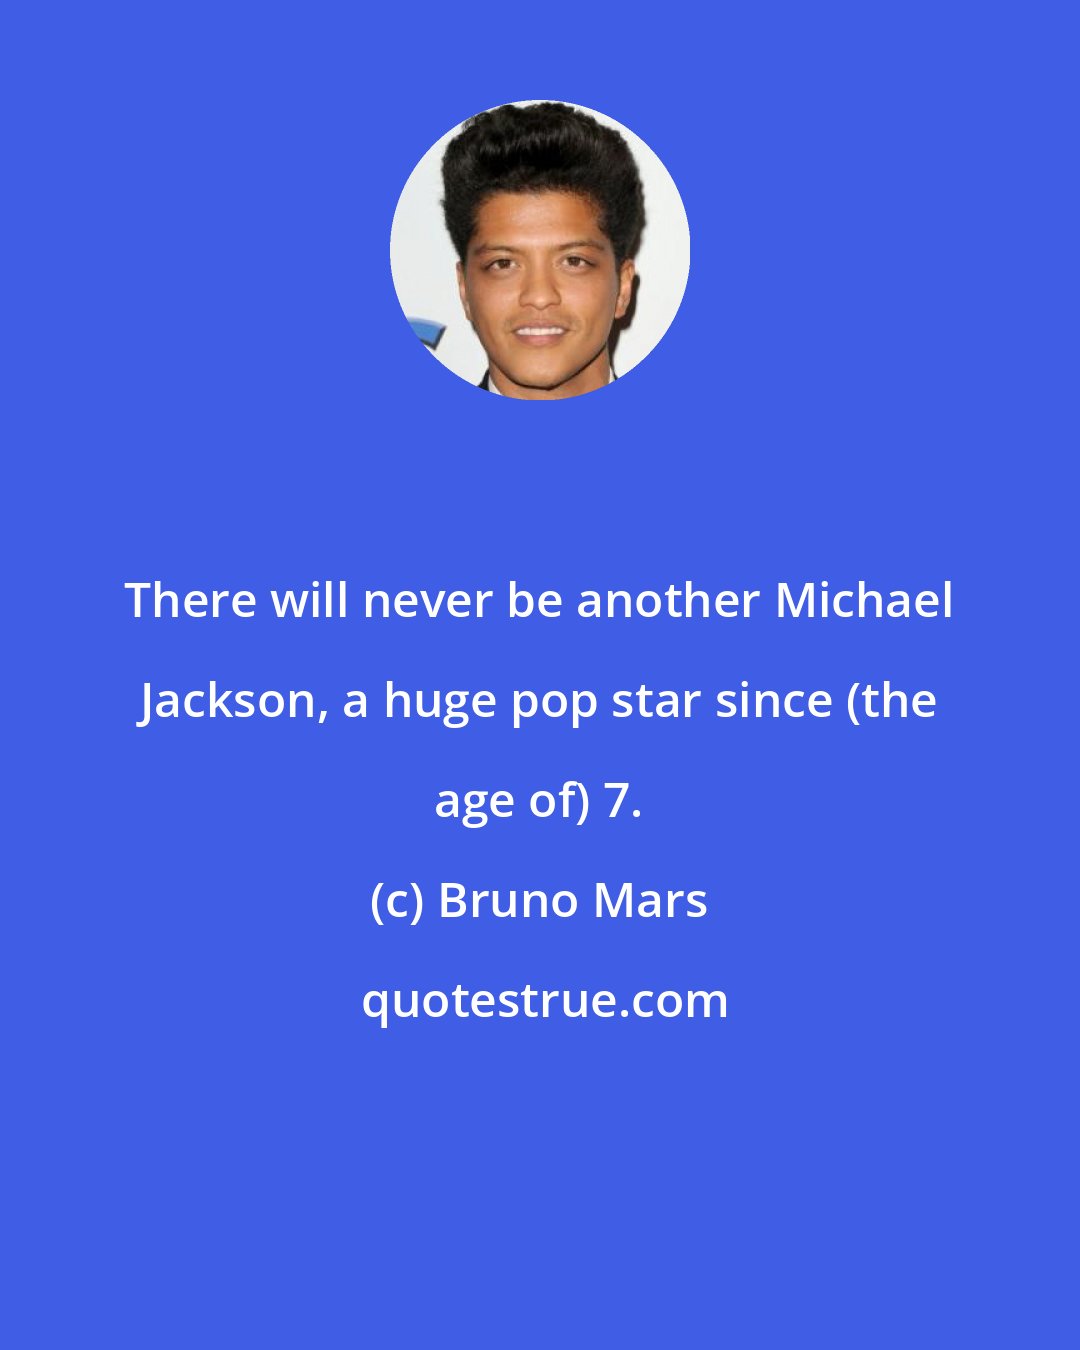 Bruno Mars: There will never be another Michael Jackson, a huge pop star since (the age of) 7.